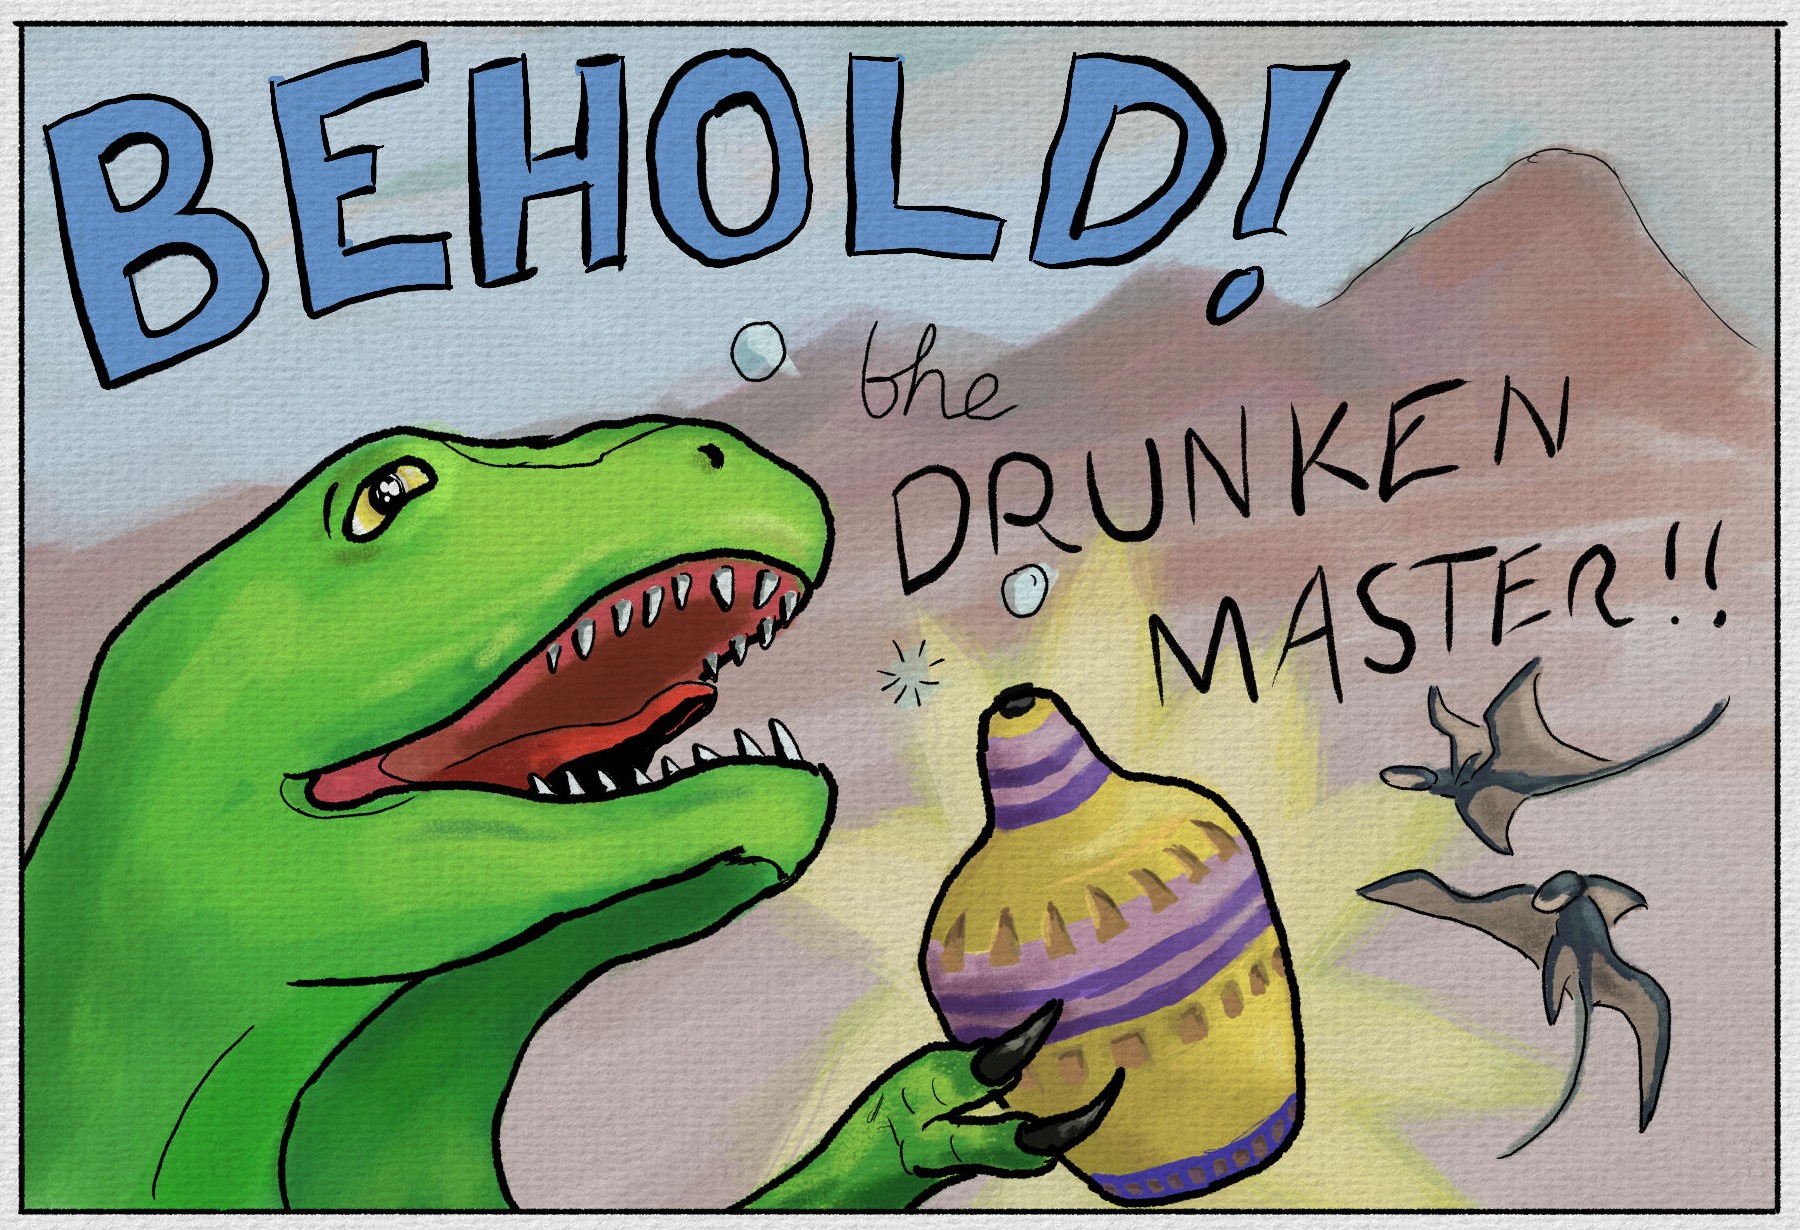 The words “Behold! The drunken master!”, below which are a Tyrannosaurus with an alcoholic beverage and a pair of cliff racers